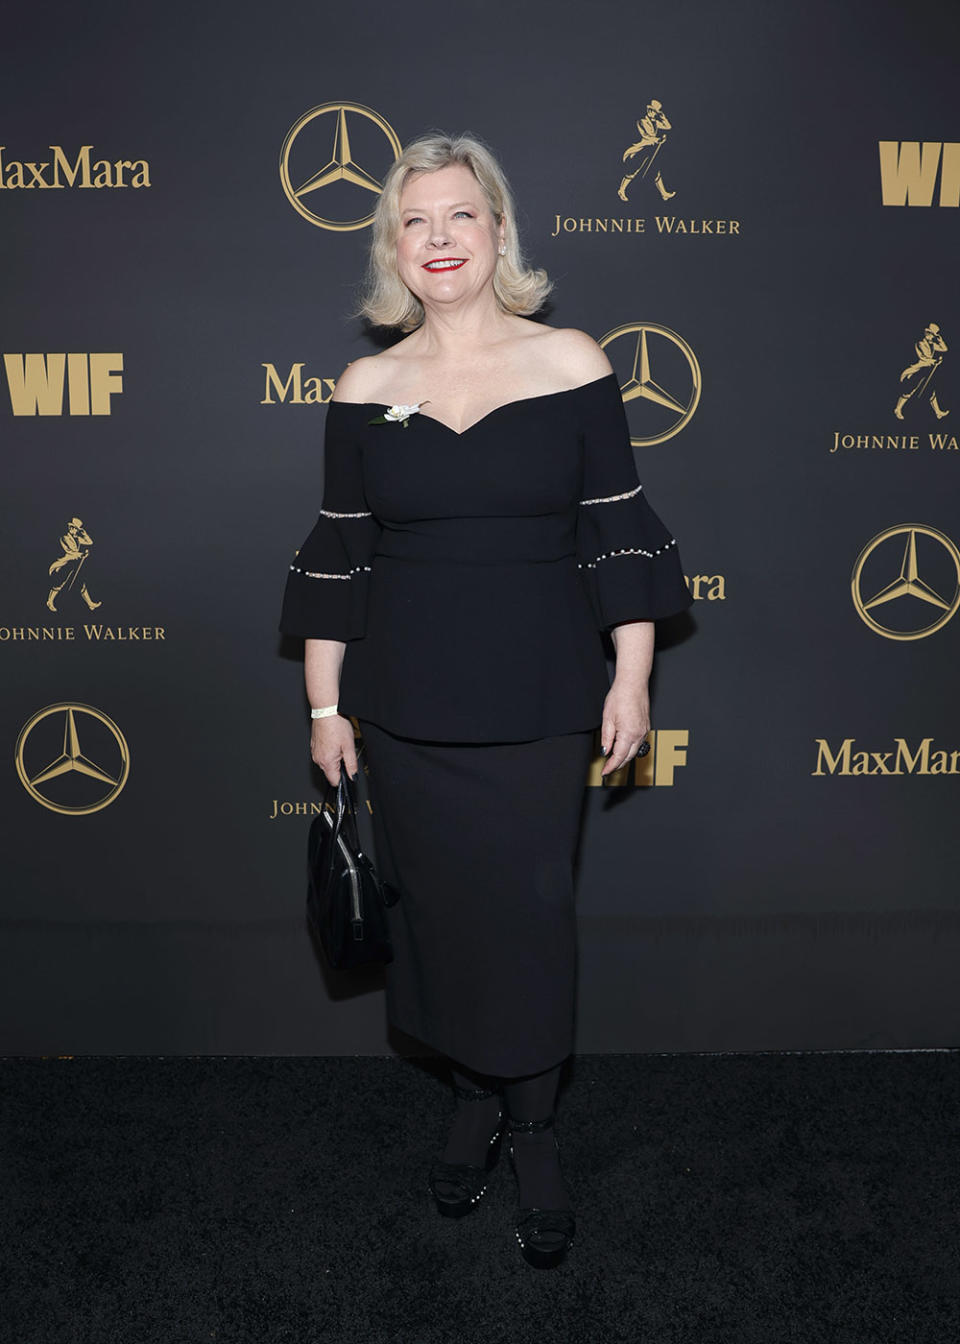 Mandy Walker attends the 16th Annual WIF Oscar® Party Presented By Johnnie Walker, Max Mara, And Mercedes-Benz on March 10, 2023 in Los Angeles, California.